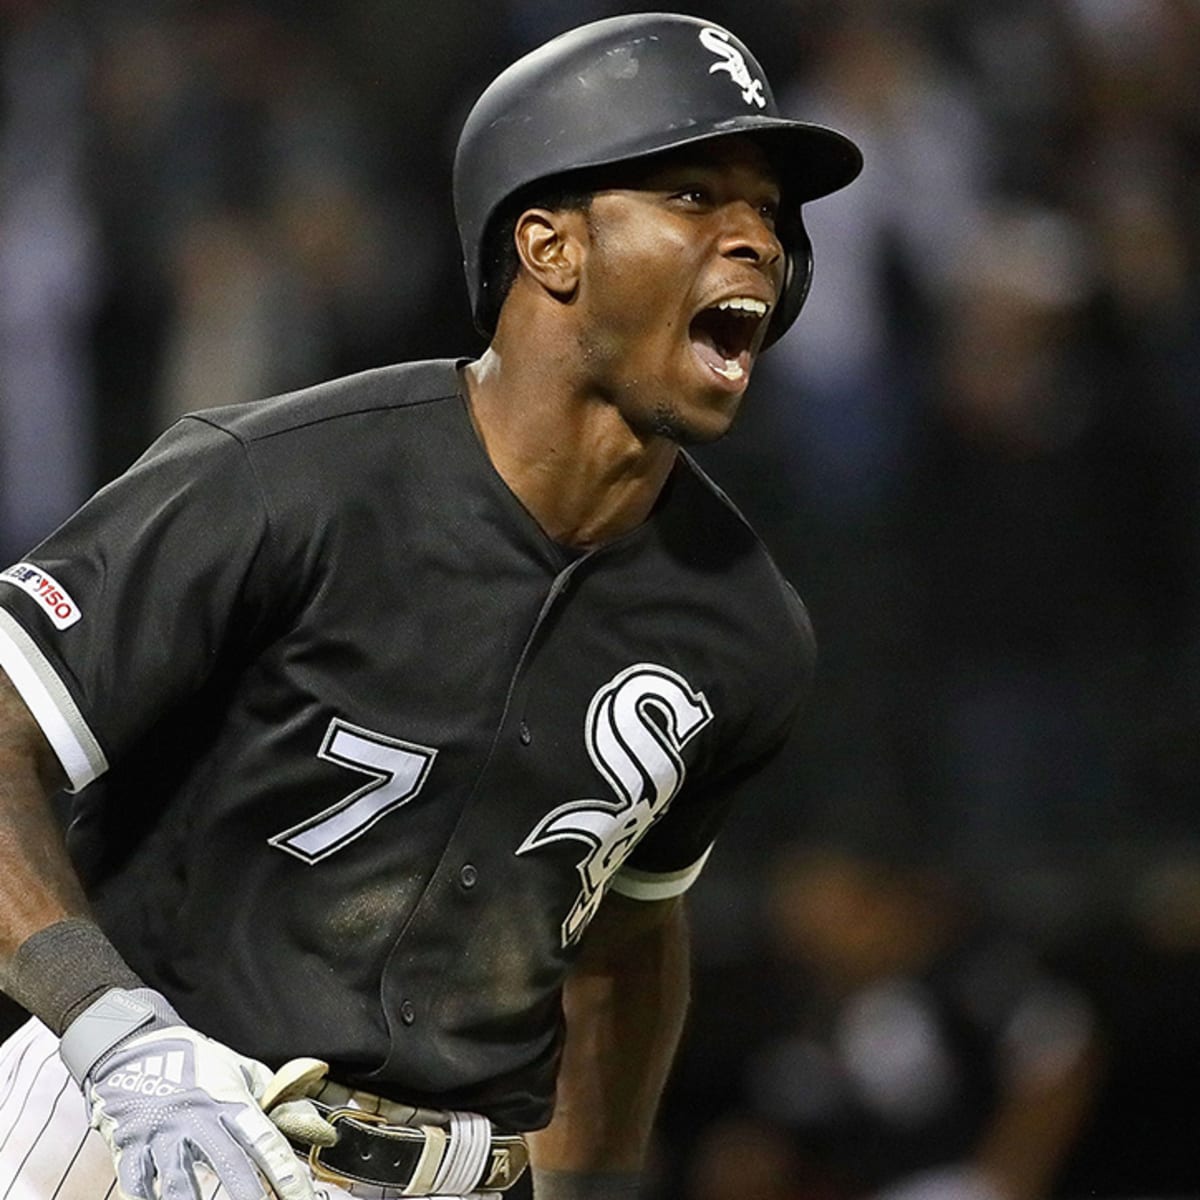 Tim Anderson of the Chicago White Sox celebrates in the dugout